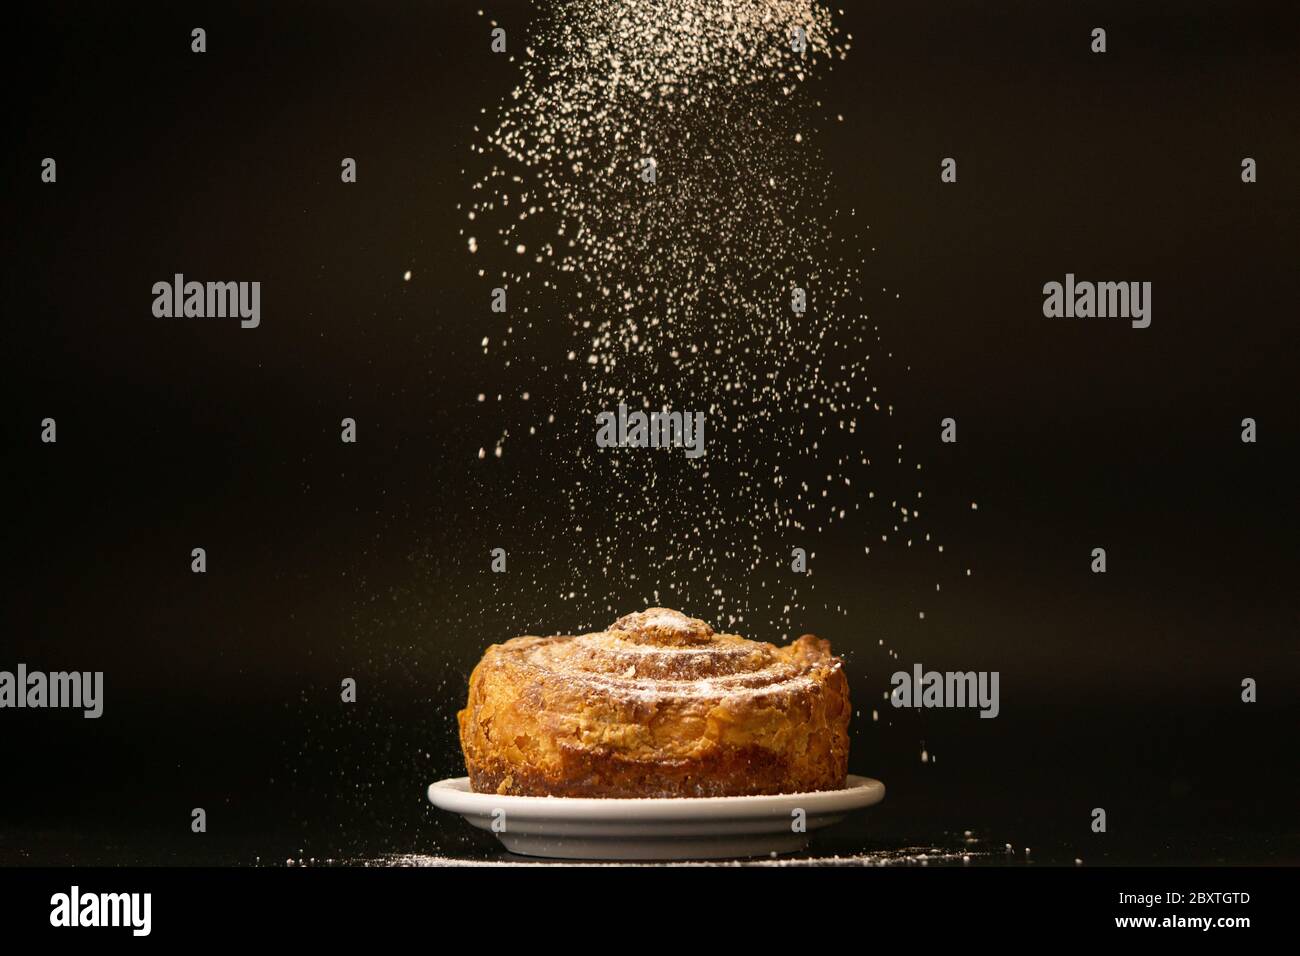 Icing sugar is sprinkling over fresh bundt cake. Icing sugar falls down, freezing motion. Copy space, black background. Bakery concept. Sweet bread on a white plate on a black background. Stock Photo